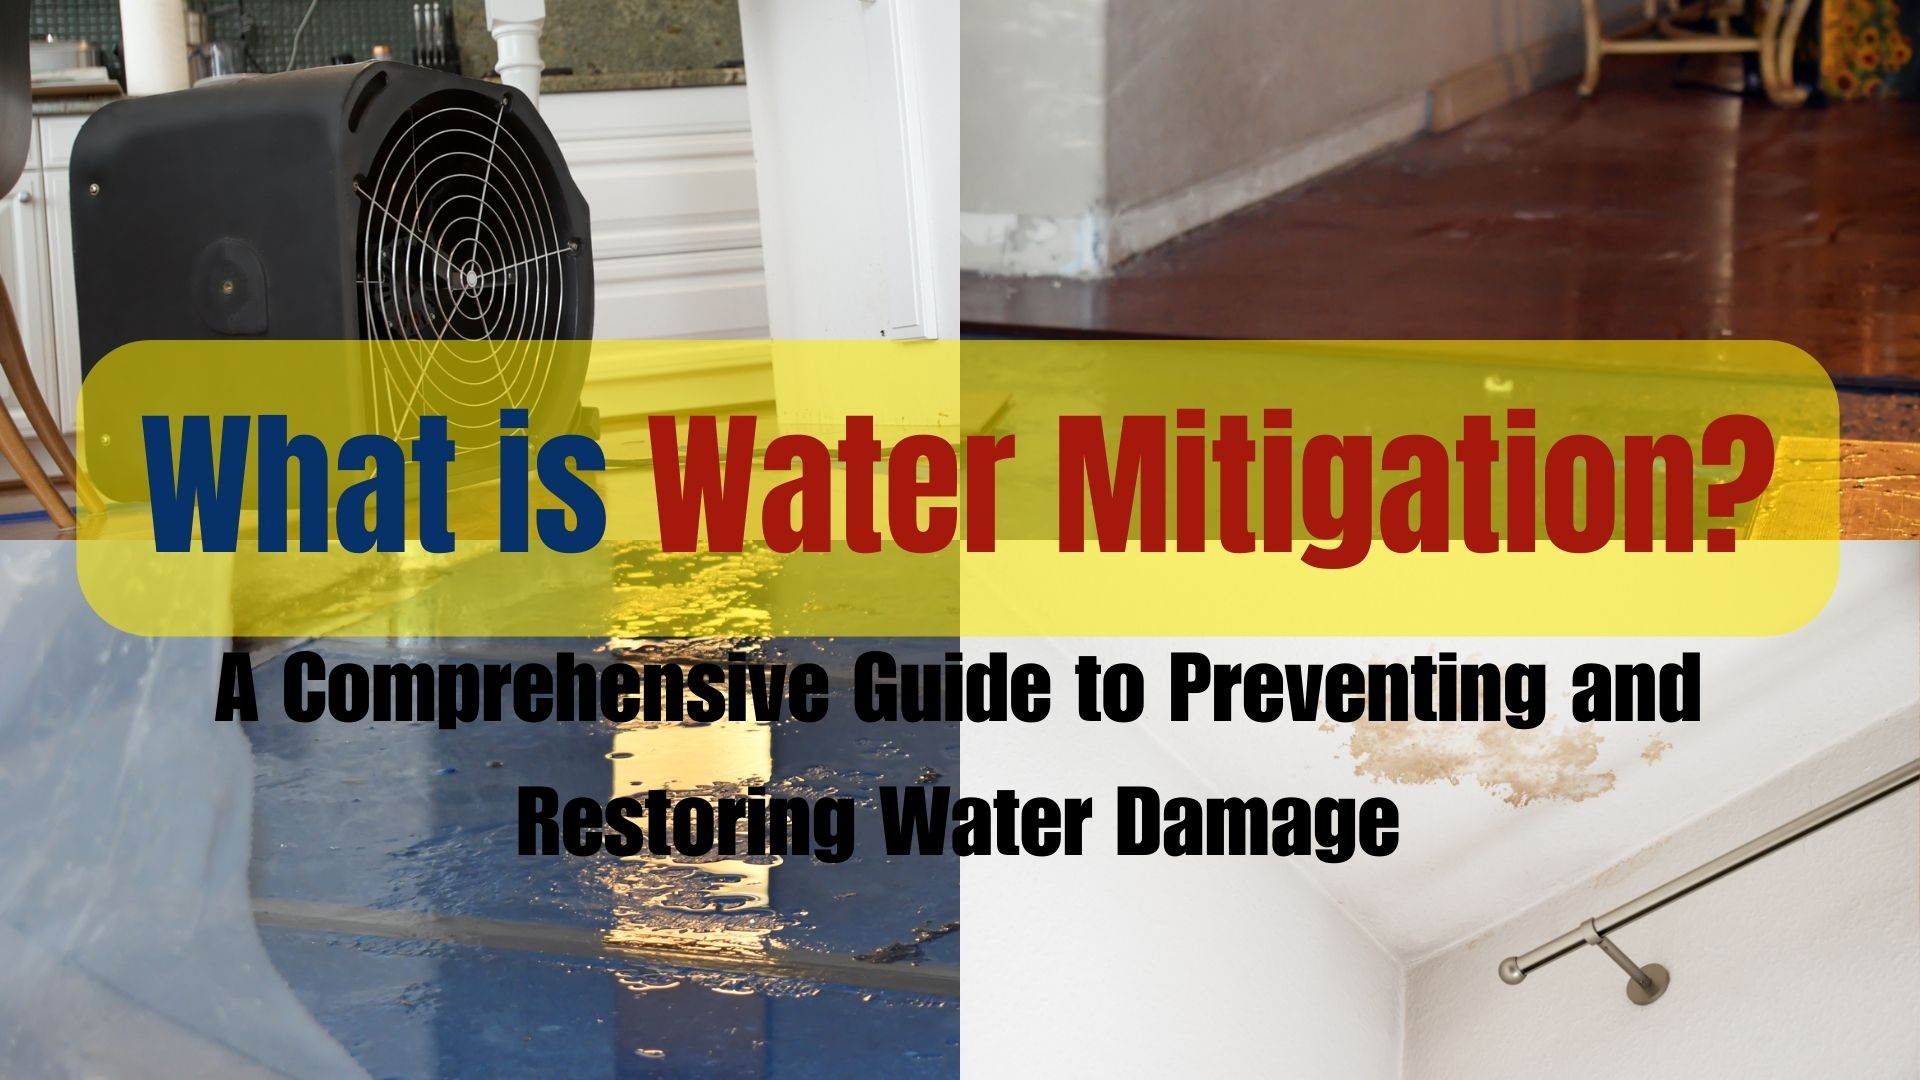 what is water mitigation